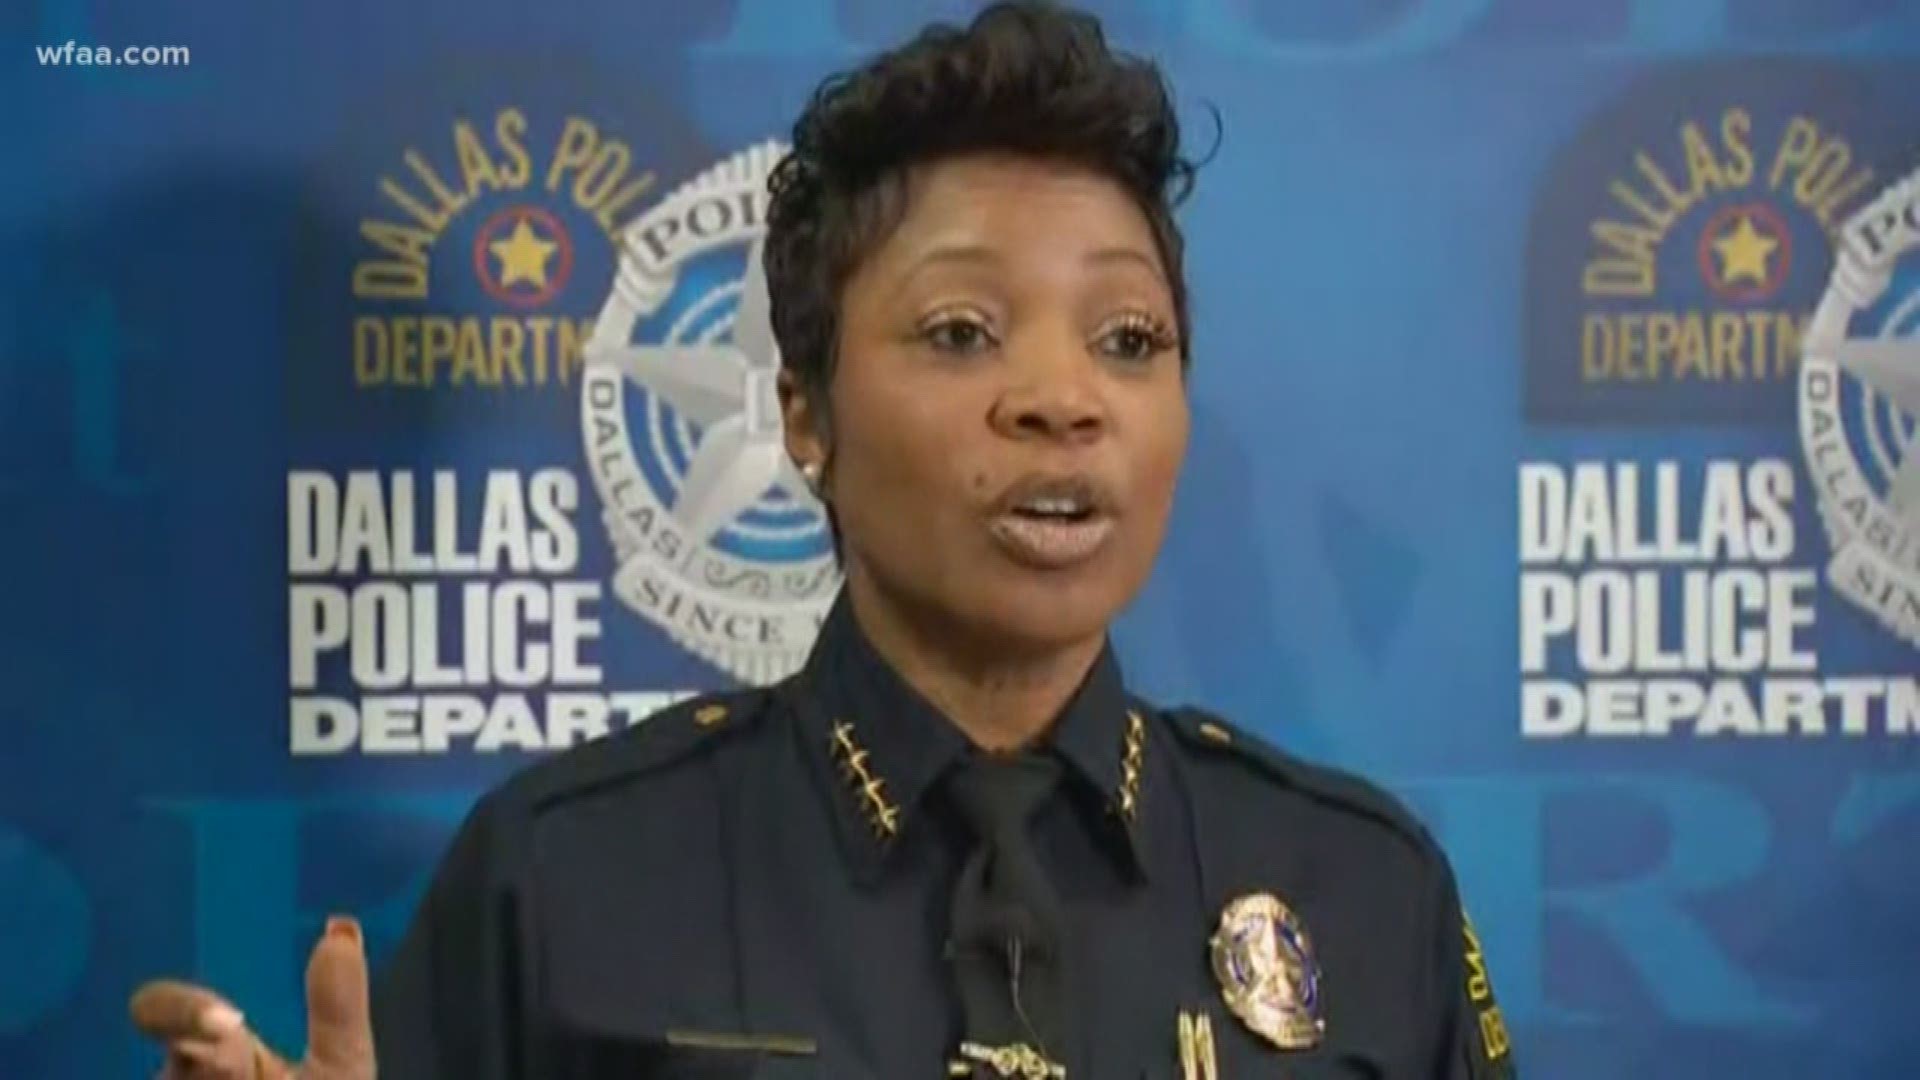 "There are socioeconomic issues that are related to crime in this city," Chief Renee Hall said.